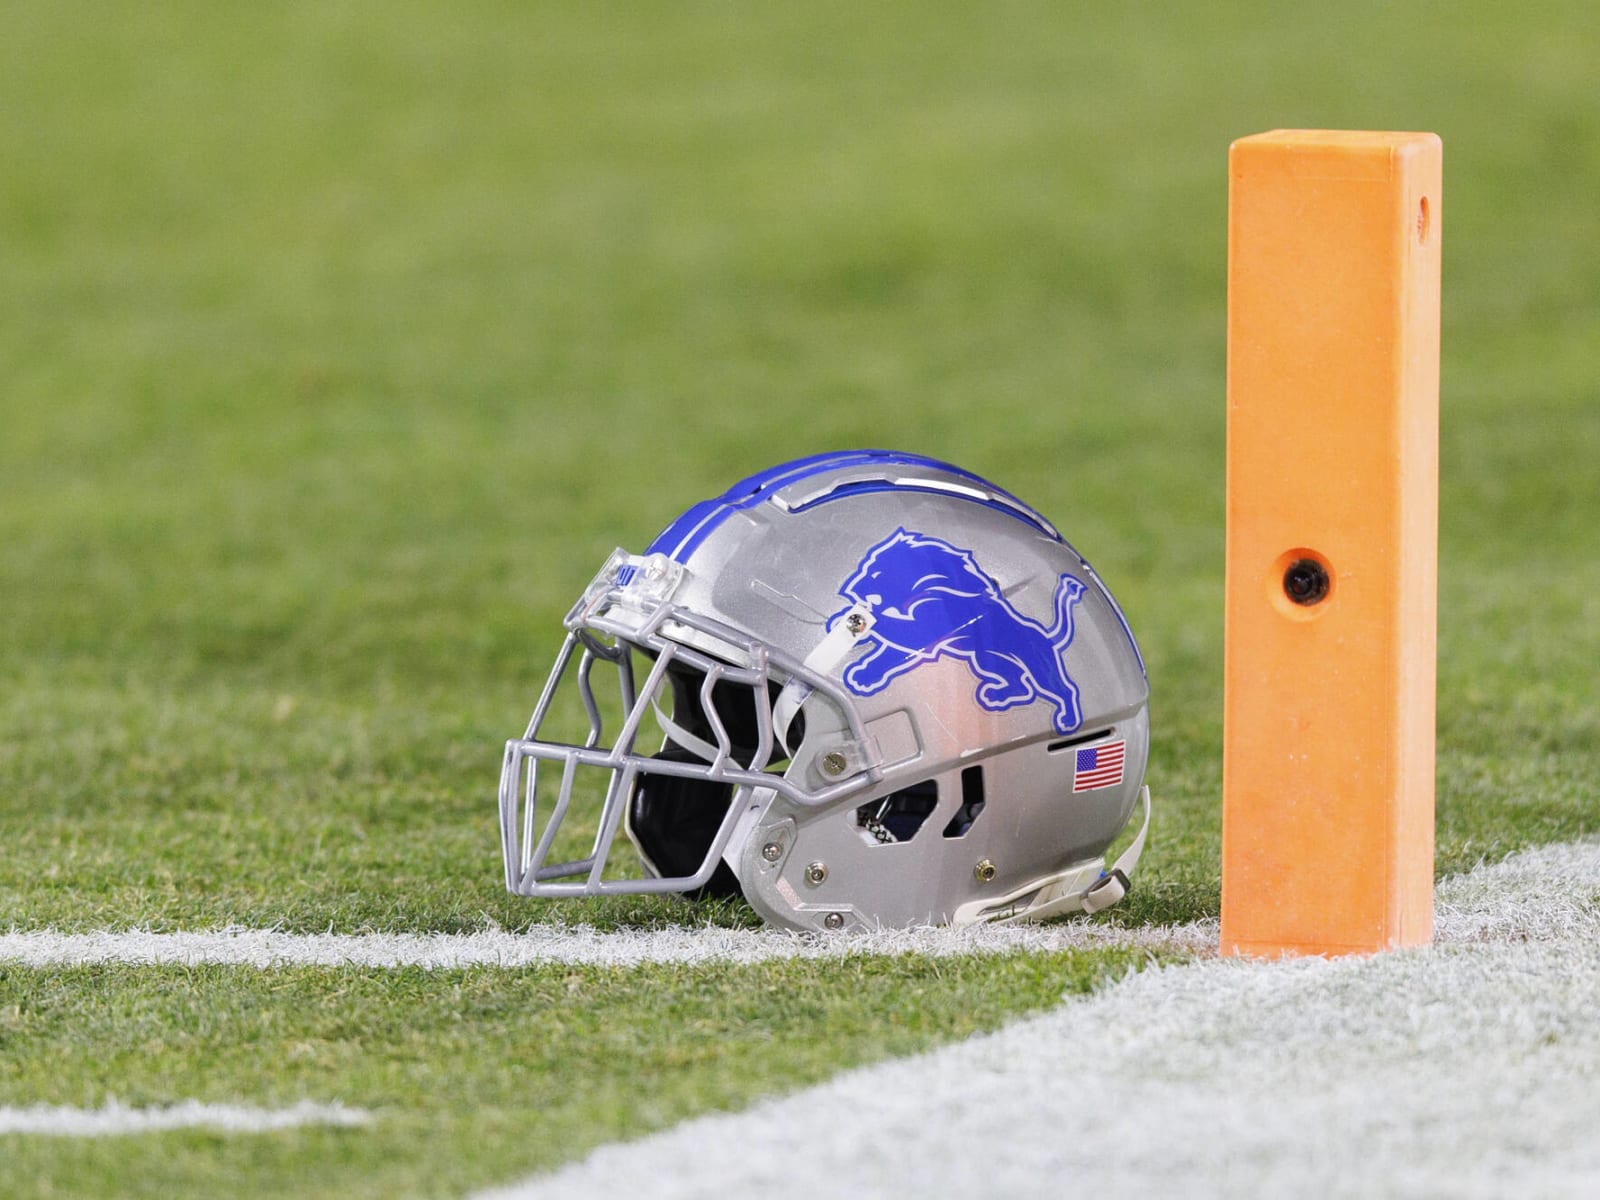 Report: NFL Investigating 5th Lions Player for Potential Violation